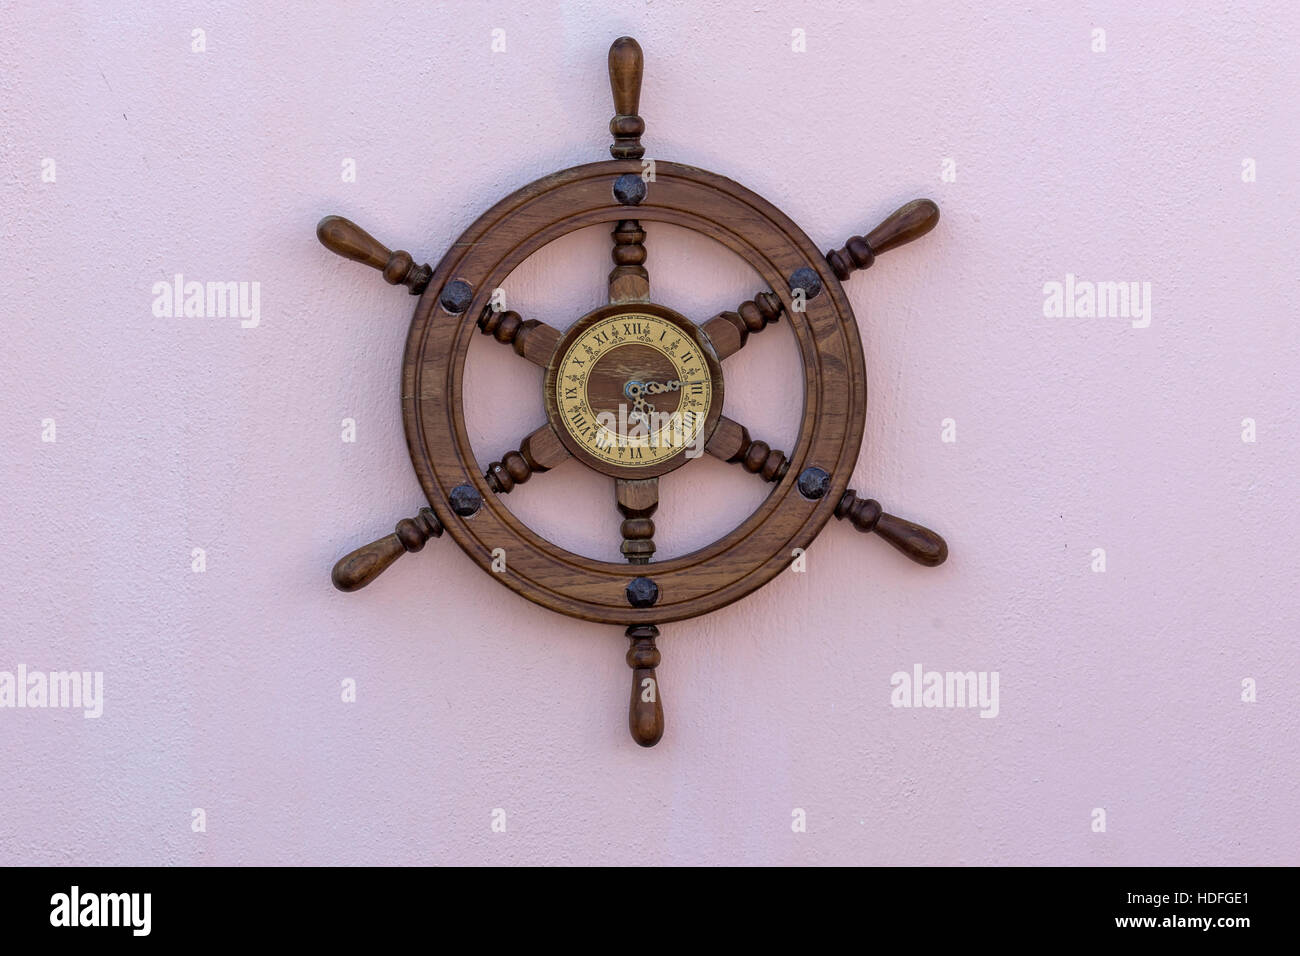 Wall clock made from boat steering hanging on the wall Stock Photo